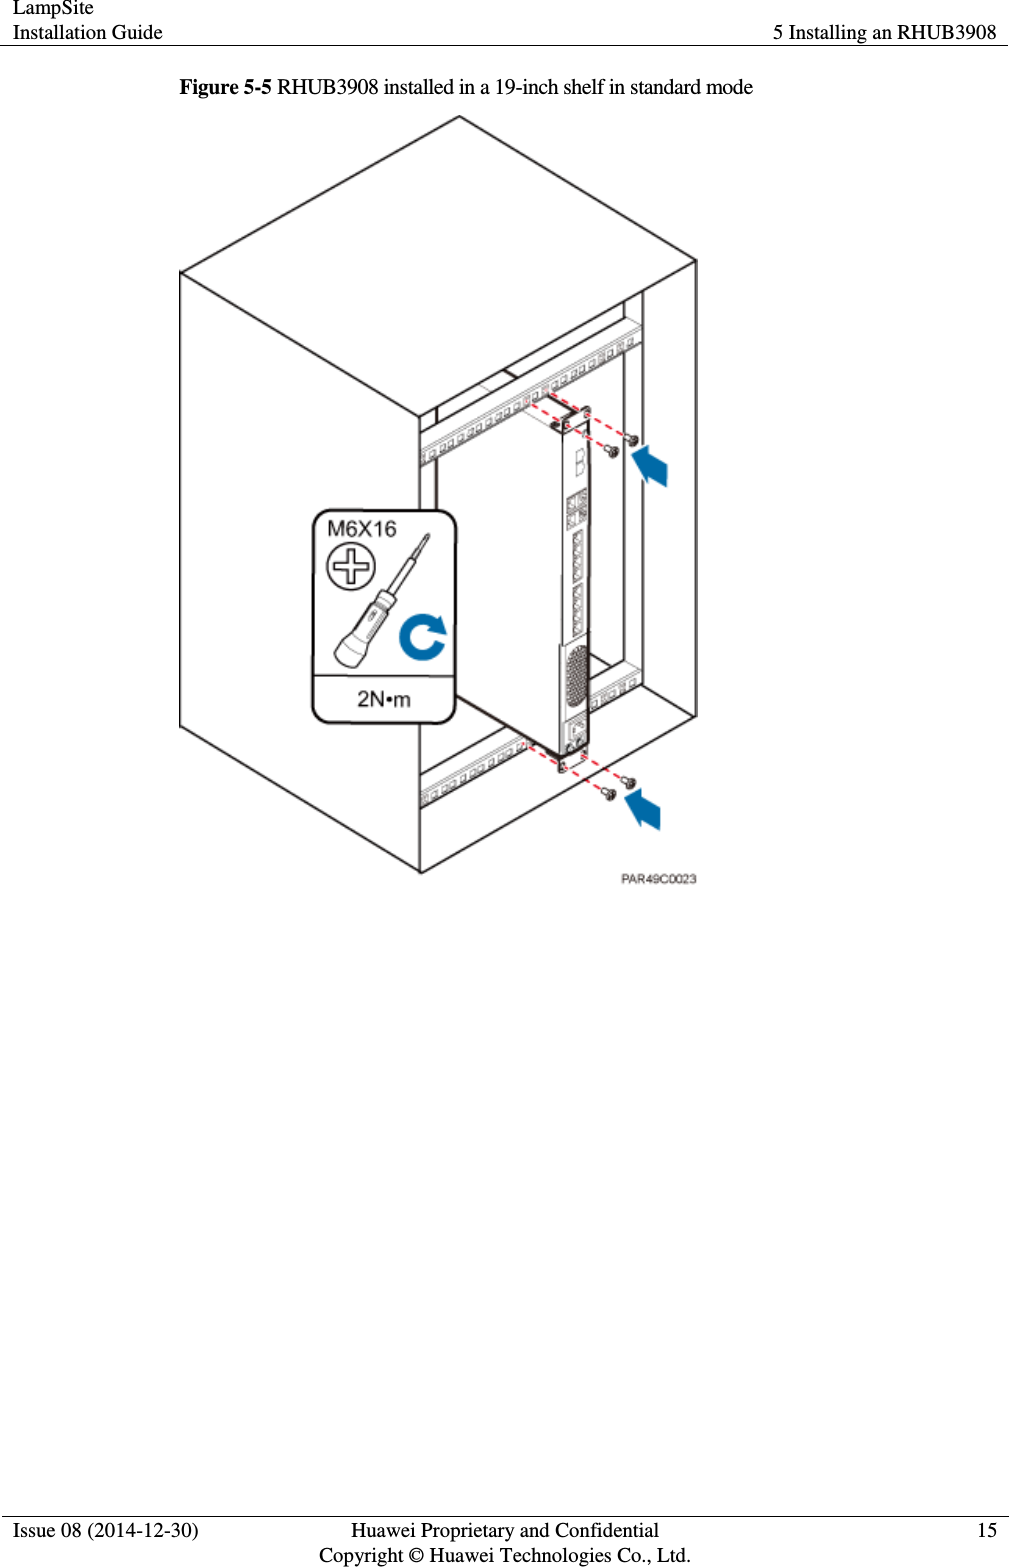 LampSite Installation Guide 5 Installing an RHUB3908  Issue 08 (2014-12-30) Huawei Proprietary and Confidential                                     Copyright © Huawei Technologies Co., Ltd. 15  Figure 5-5 RHUB3908 installed in a 19-inch shelf in standard mode   